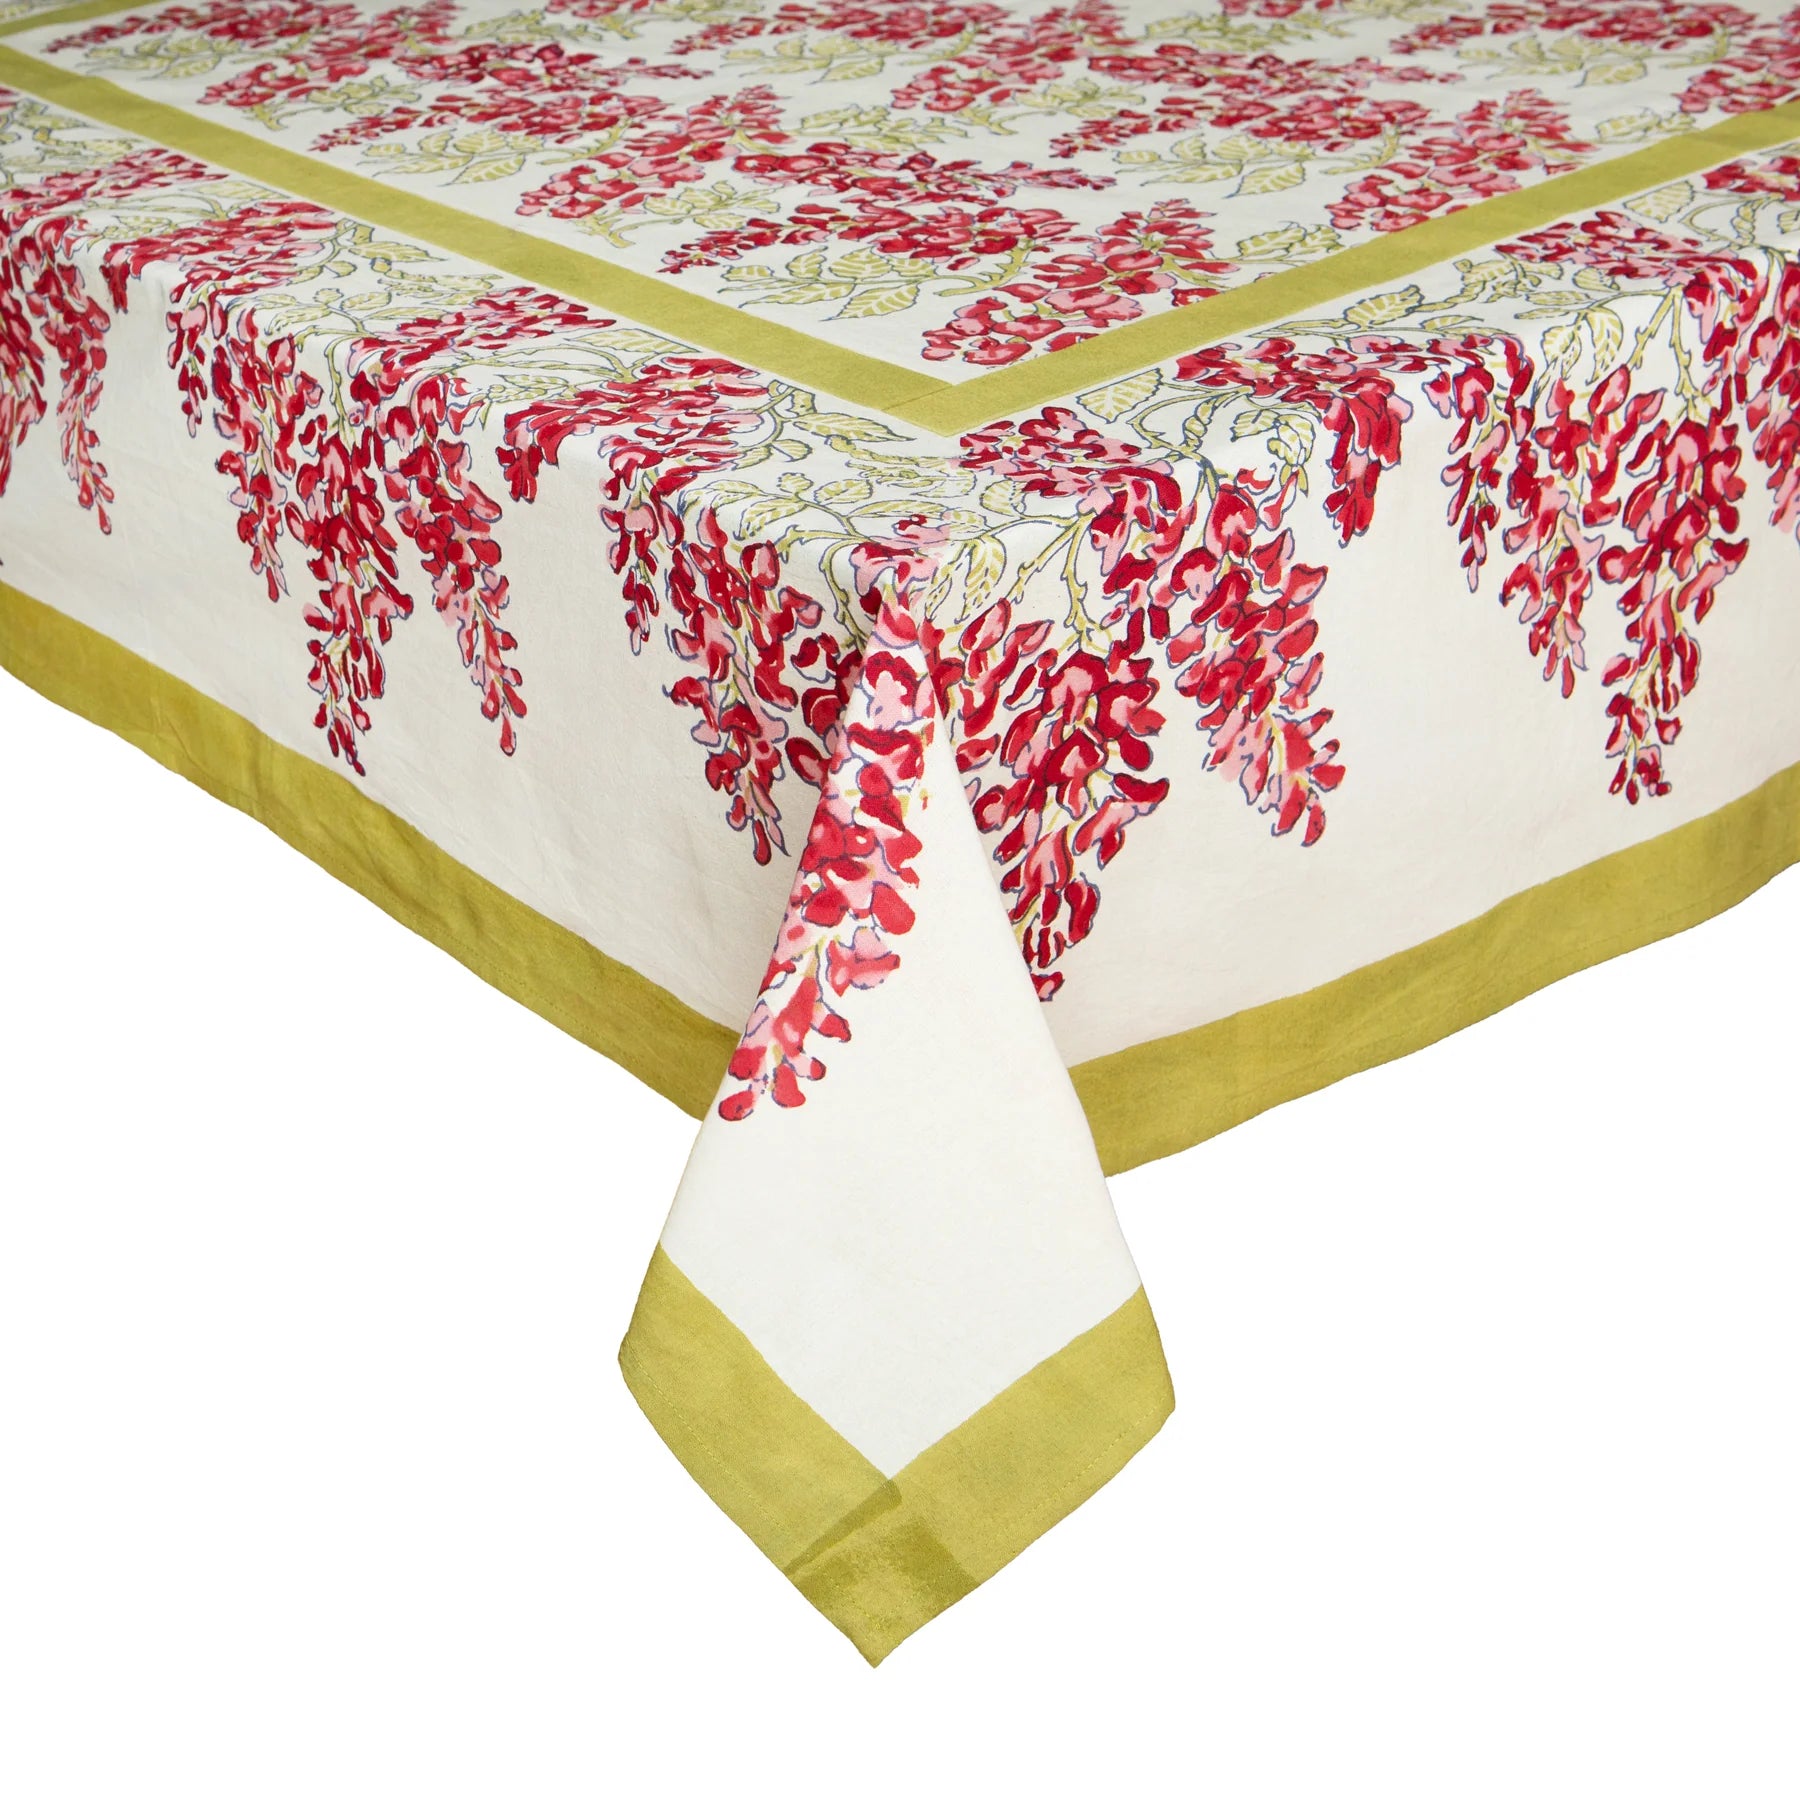 Wisteria Green & Pink Tablecloth